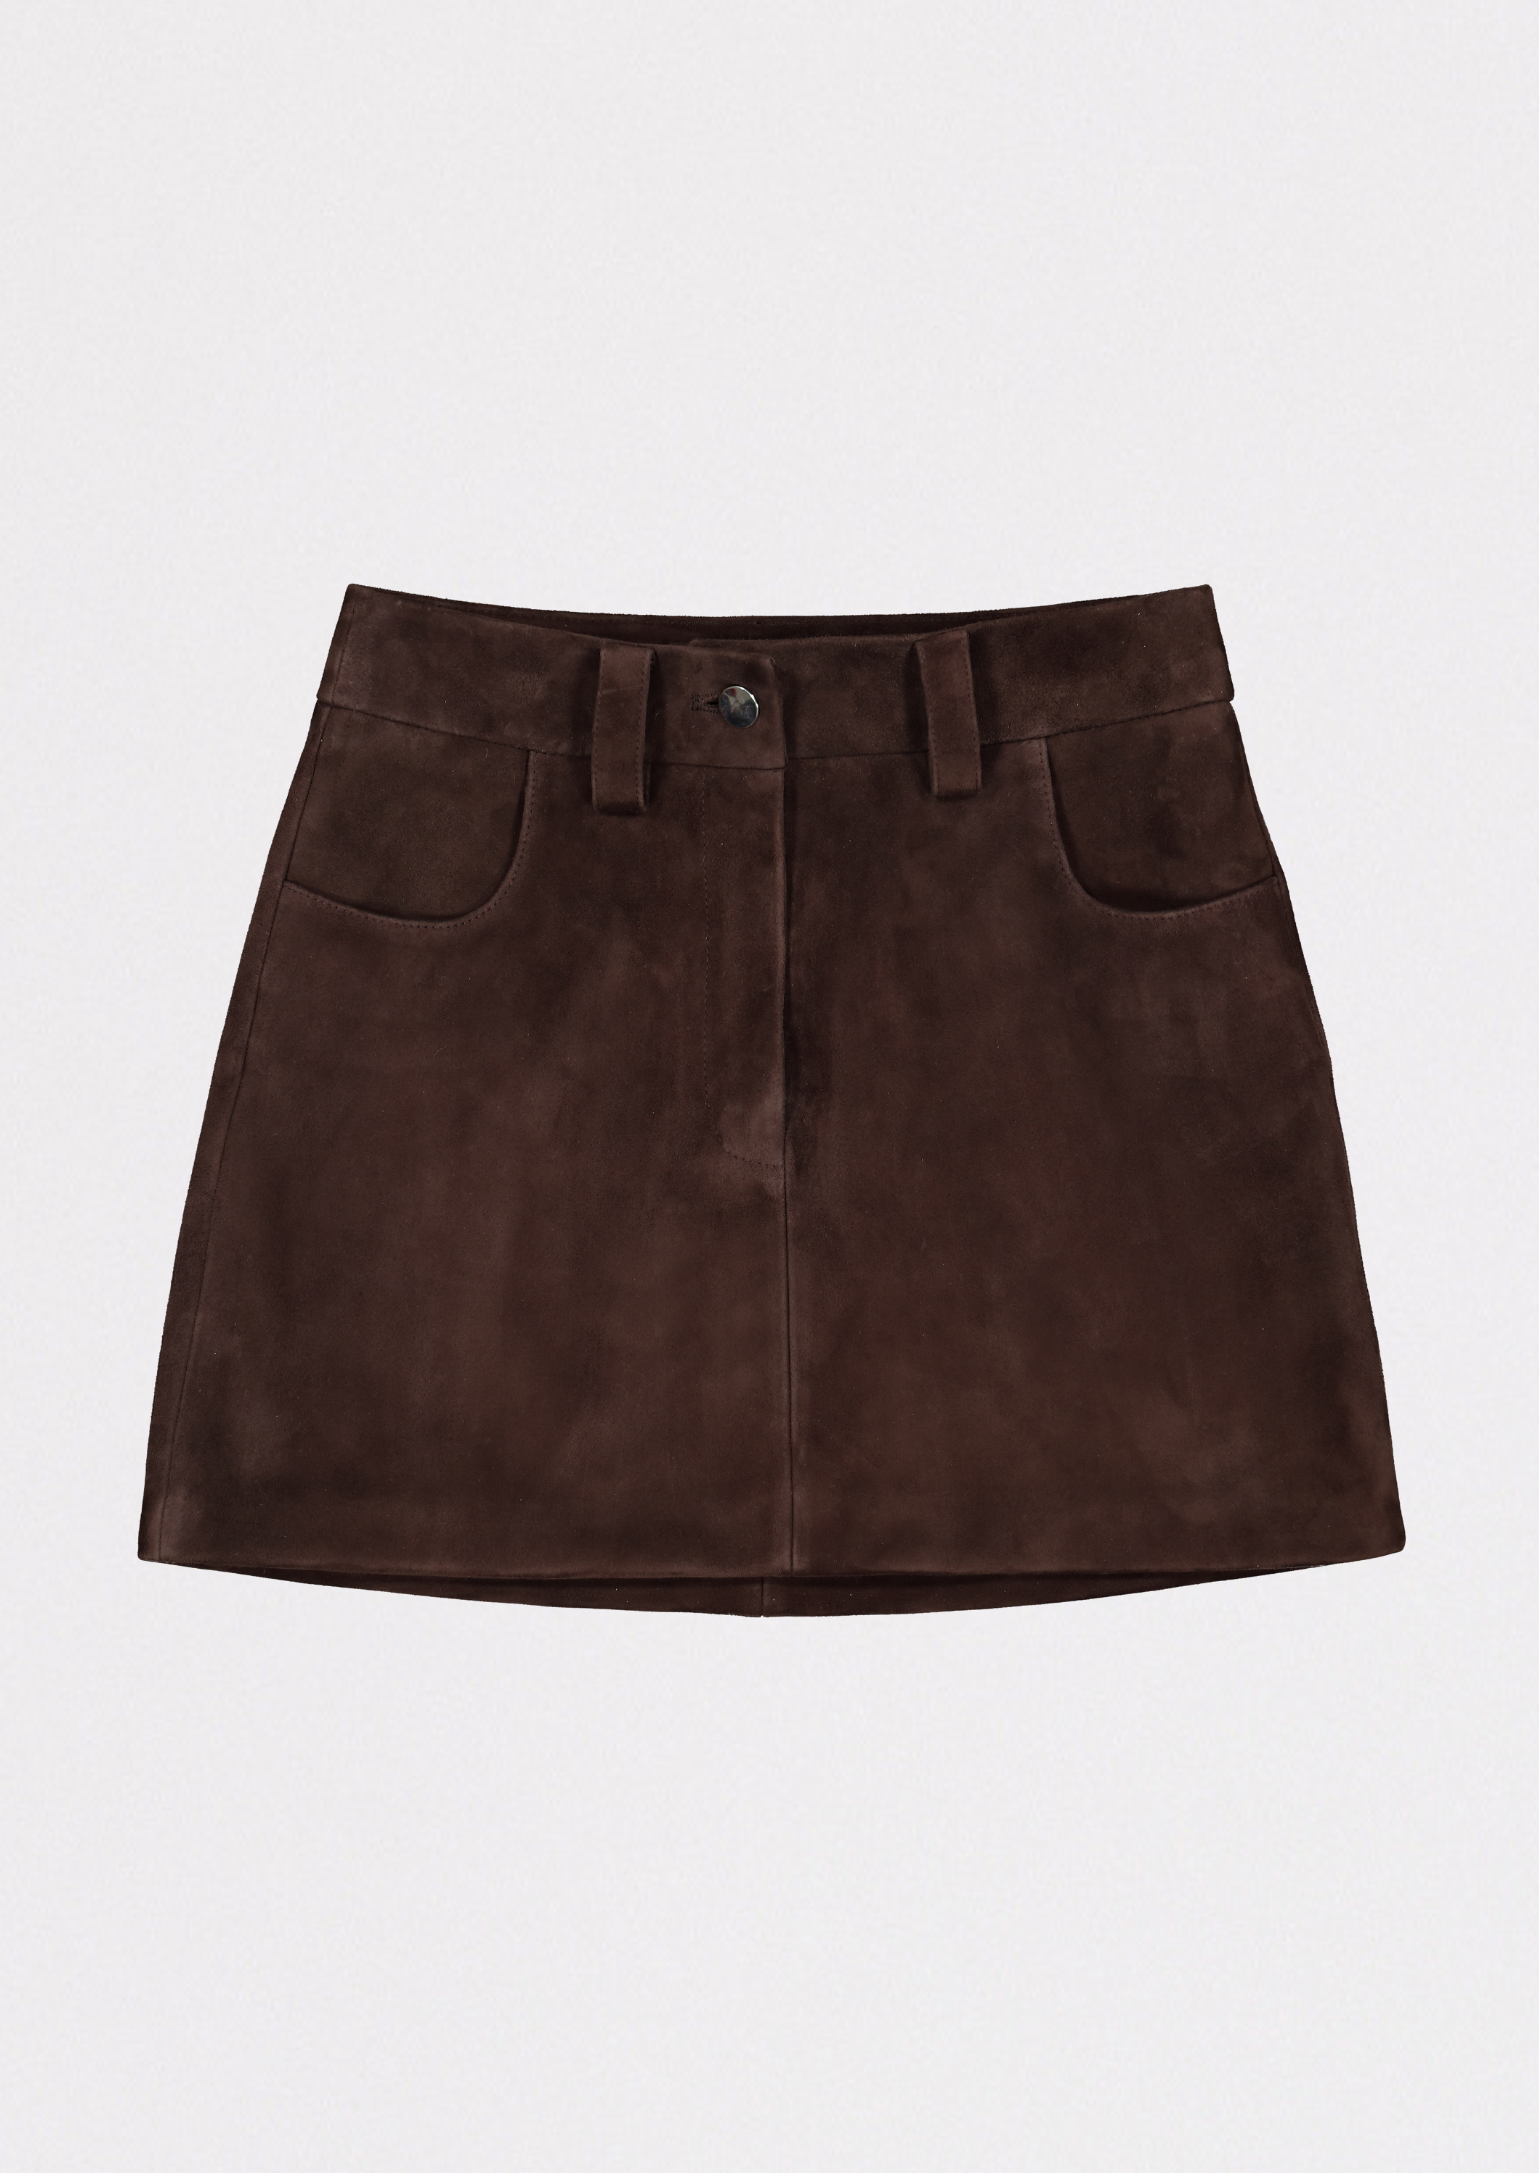 THE SUEDE SKIRT